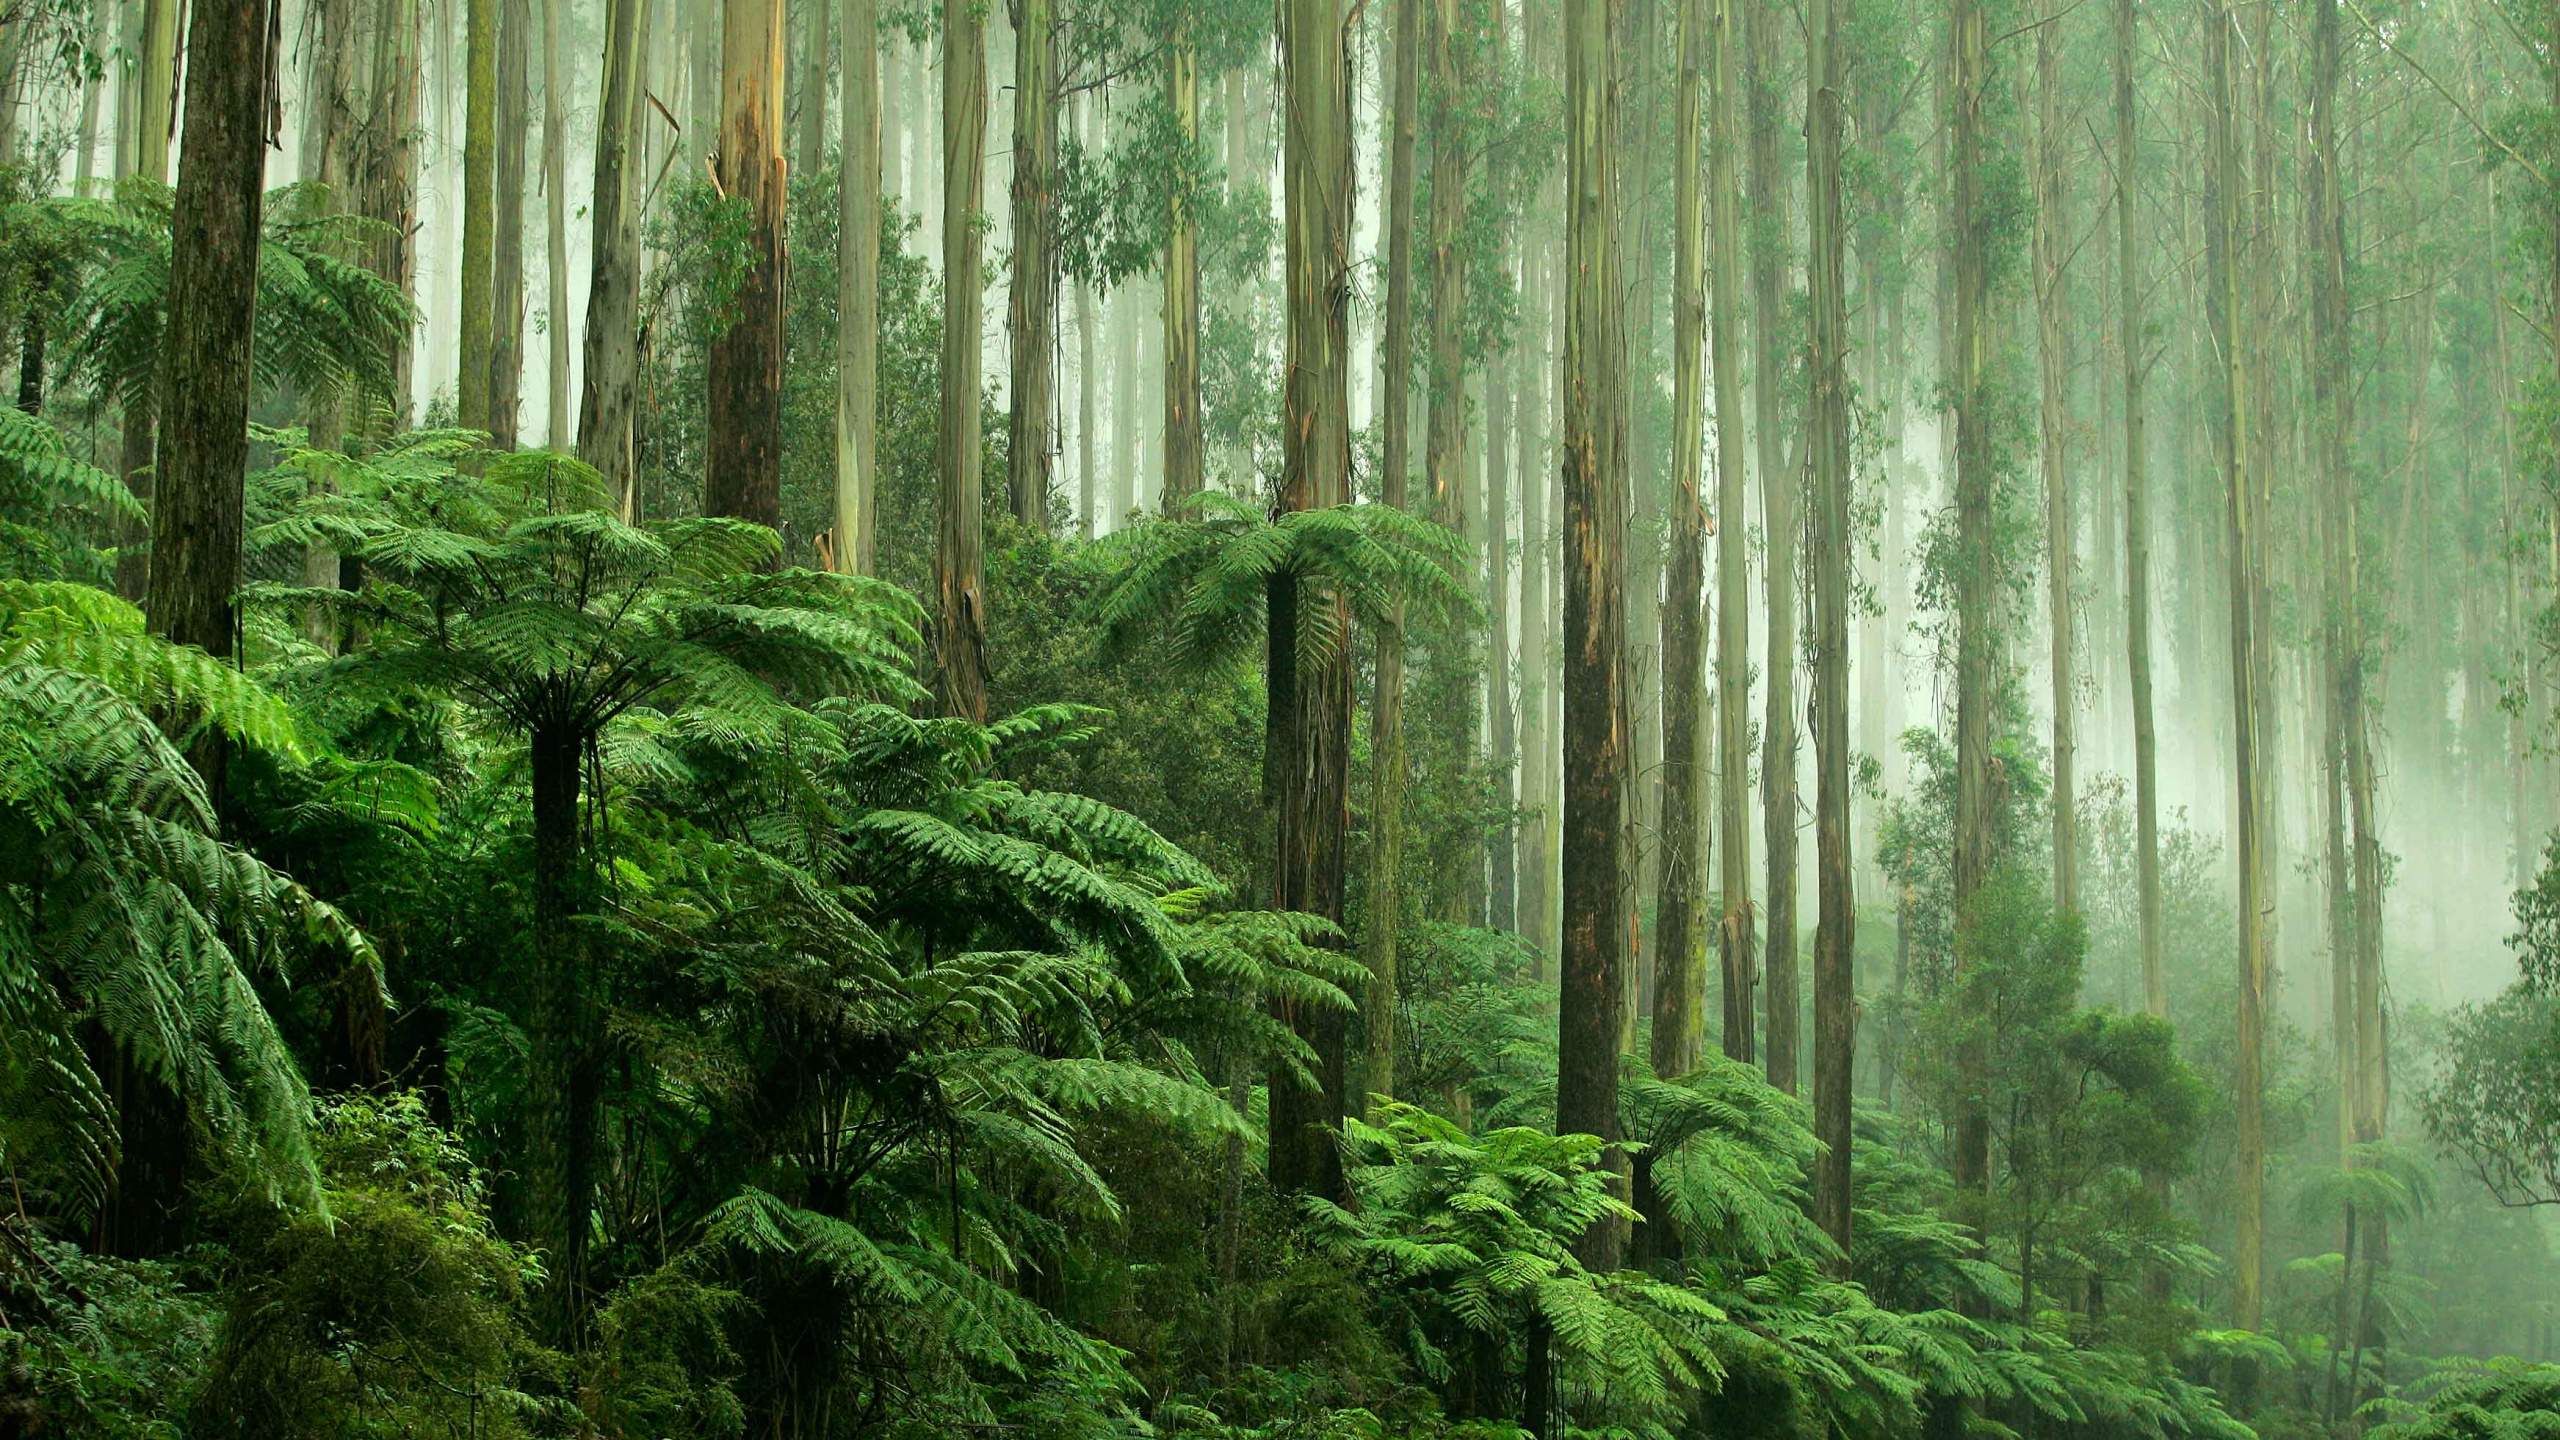 Green Plants and Trees During Daytime. Wallpaper in 2560x1440 Resolution